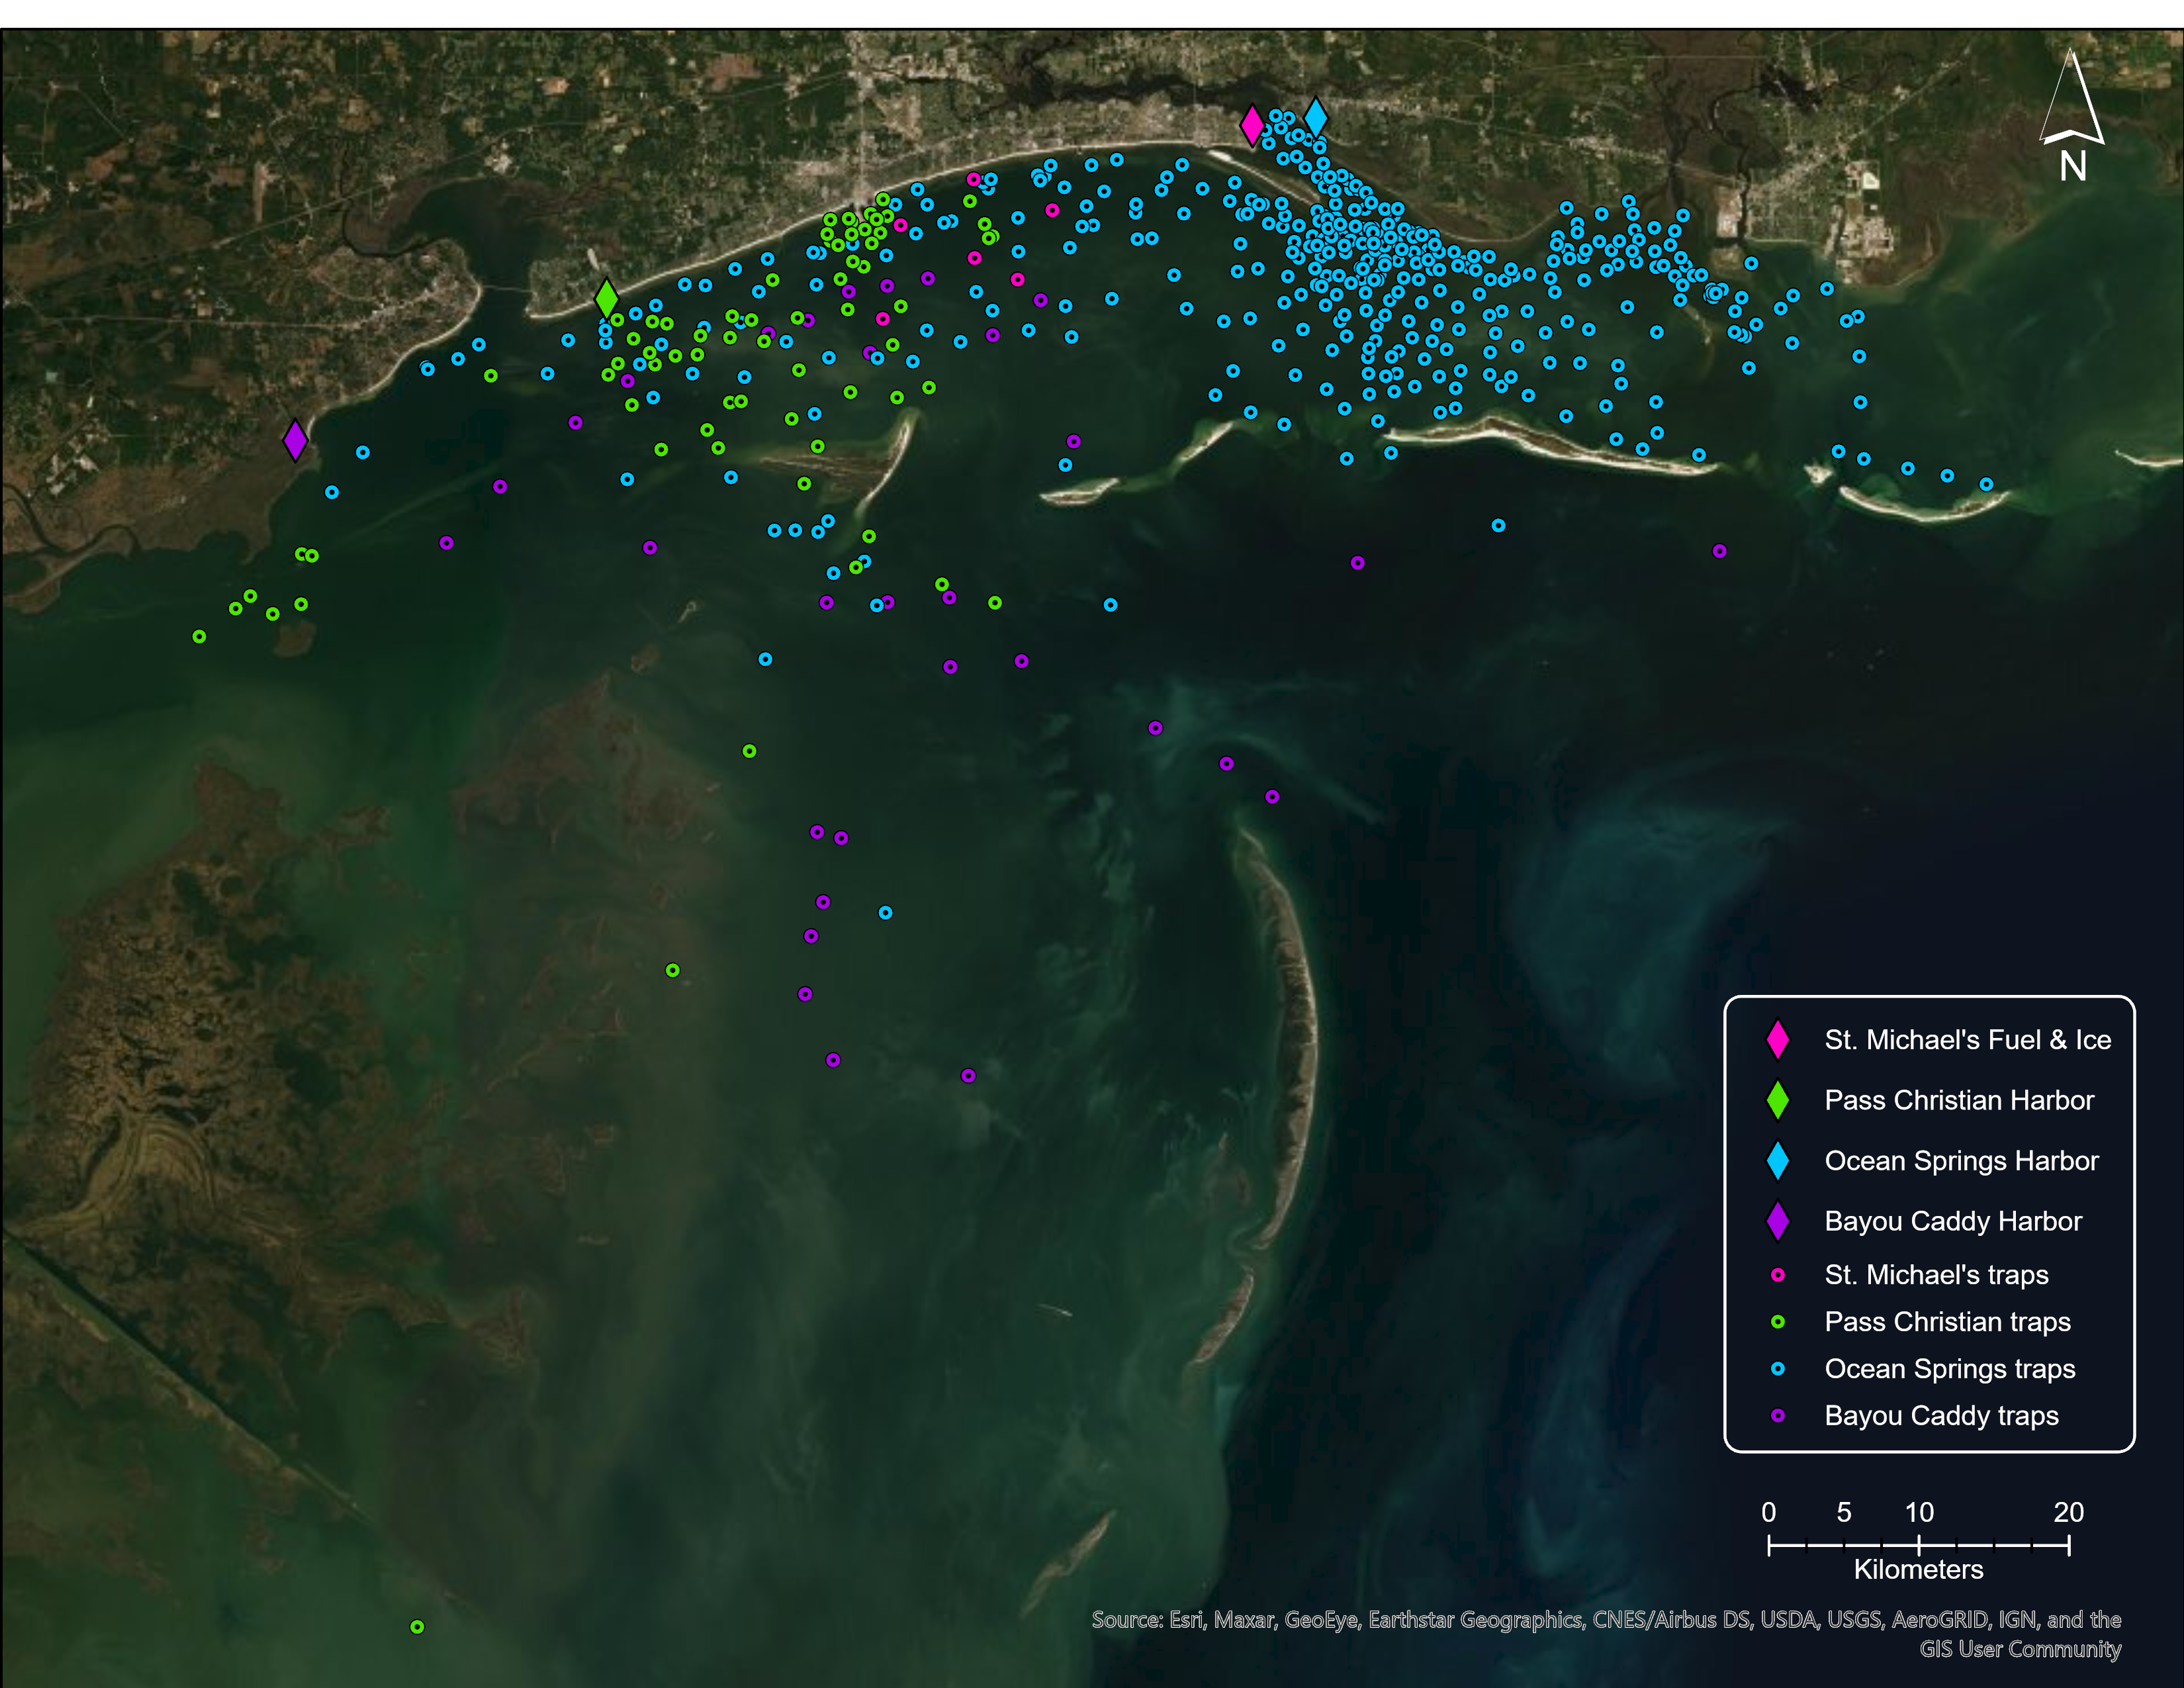 map of derelict crab traps caught and removed by shrimpers participating in derelict trap reward program. The traps are color coded by the sites they were disposed of at.